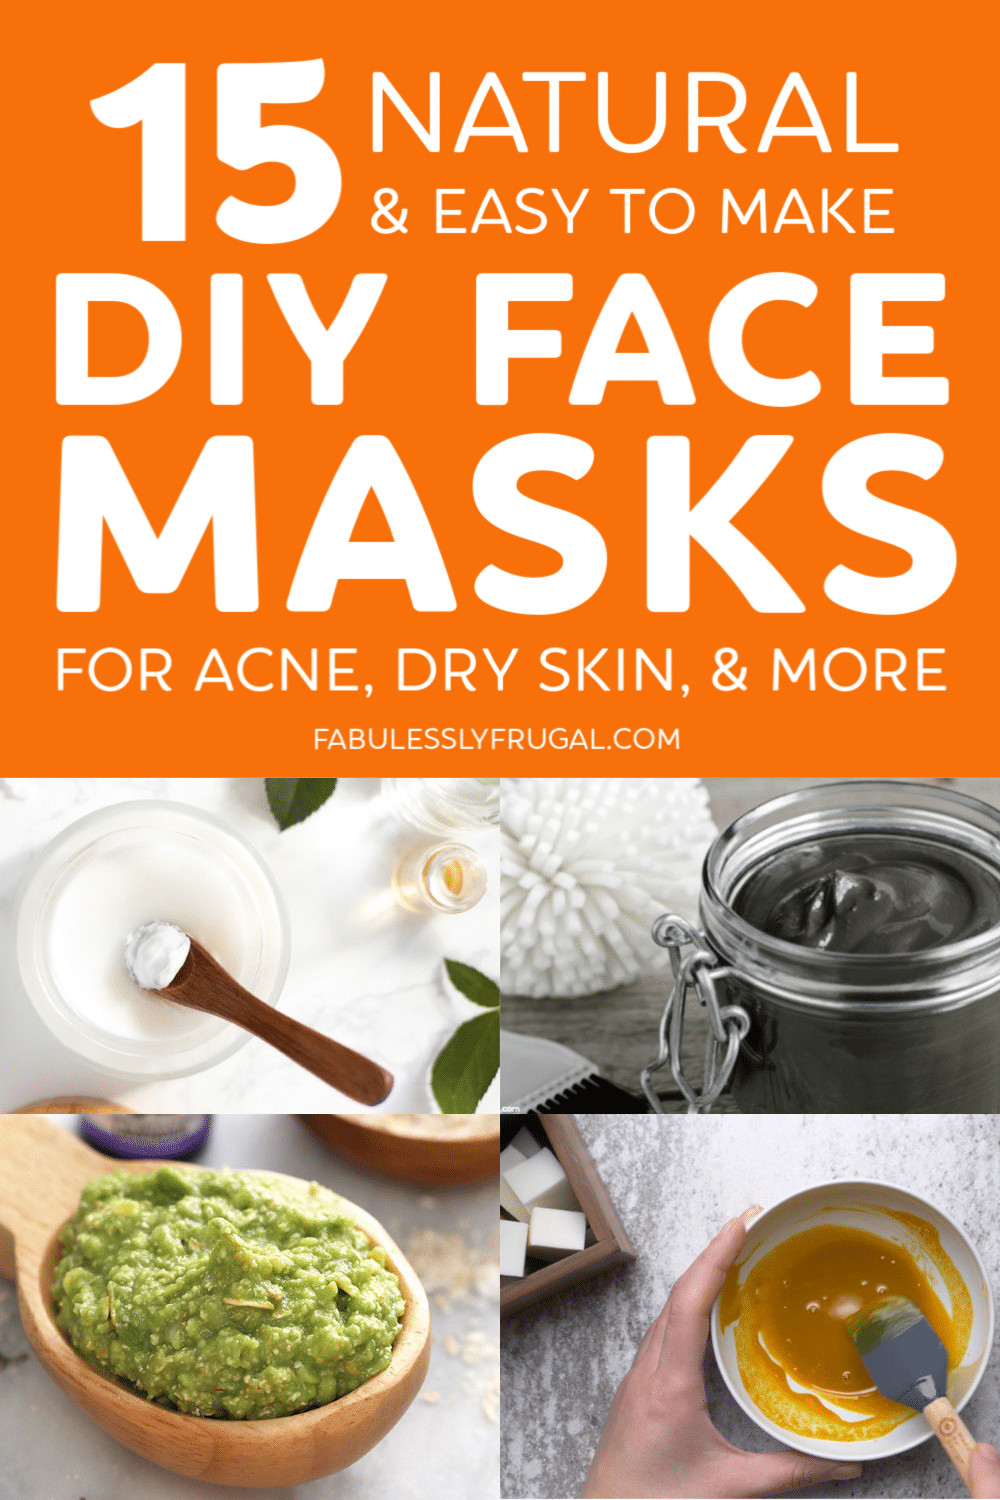 DIY Face Mask For Dry Skin And Acne
 15 Best DIY Face Masks for Acne Dry Skin and More